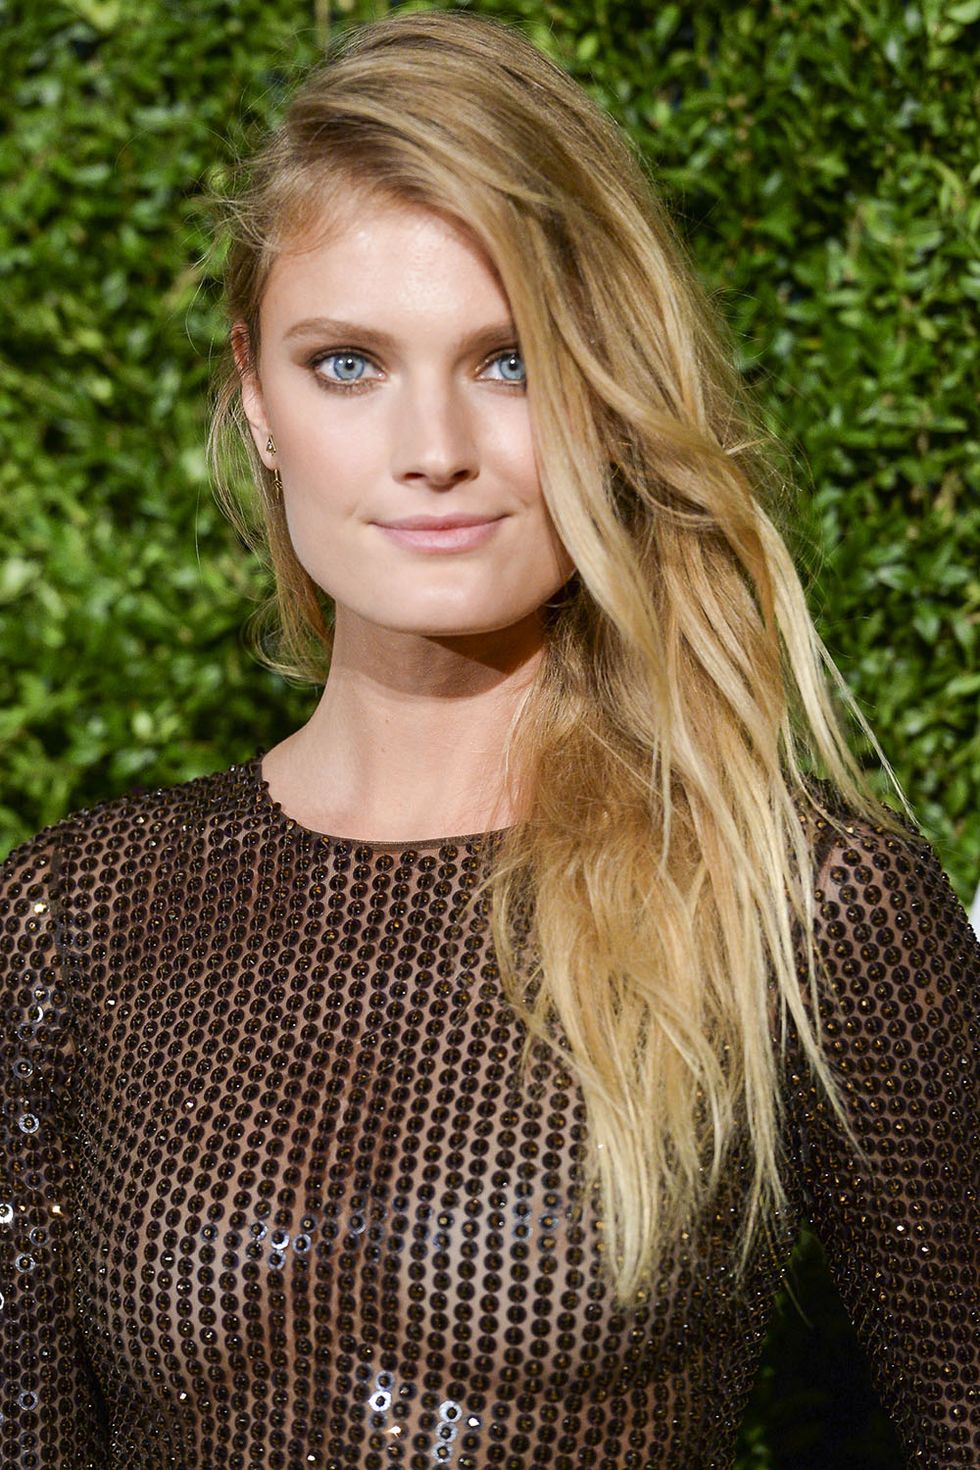 <p>Bedhead looks just as good on the red carpet as it does on a fluffy pillow. They key is to keep lots of volume at the crown but tone down the frizz and fuzz, like Constance Jablonski.</p>